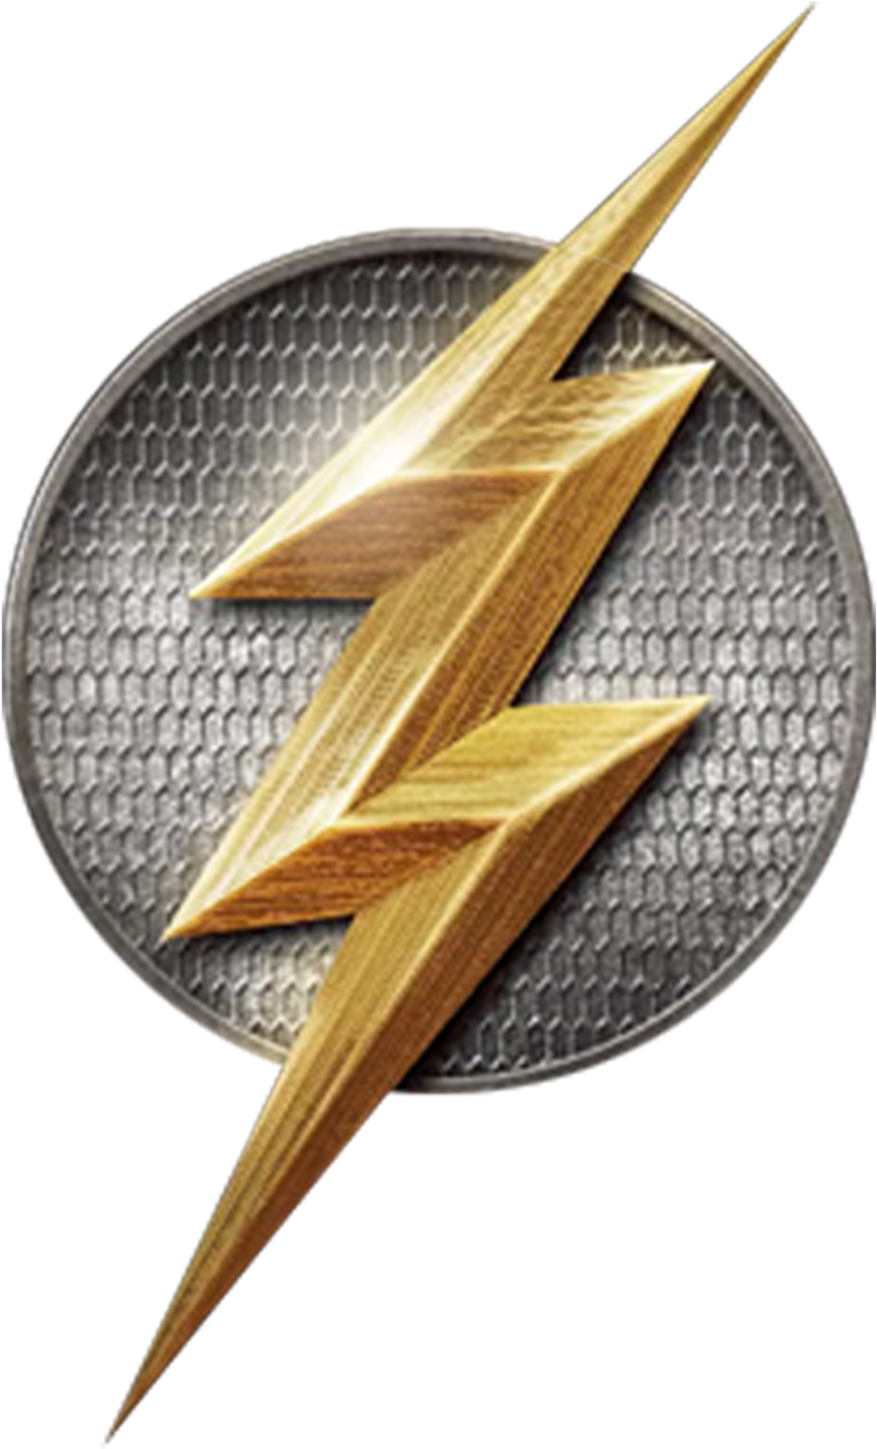 A Gold Lightning Bolt In A Circle